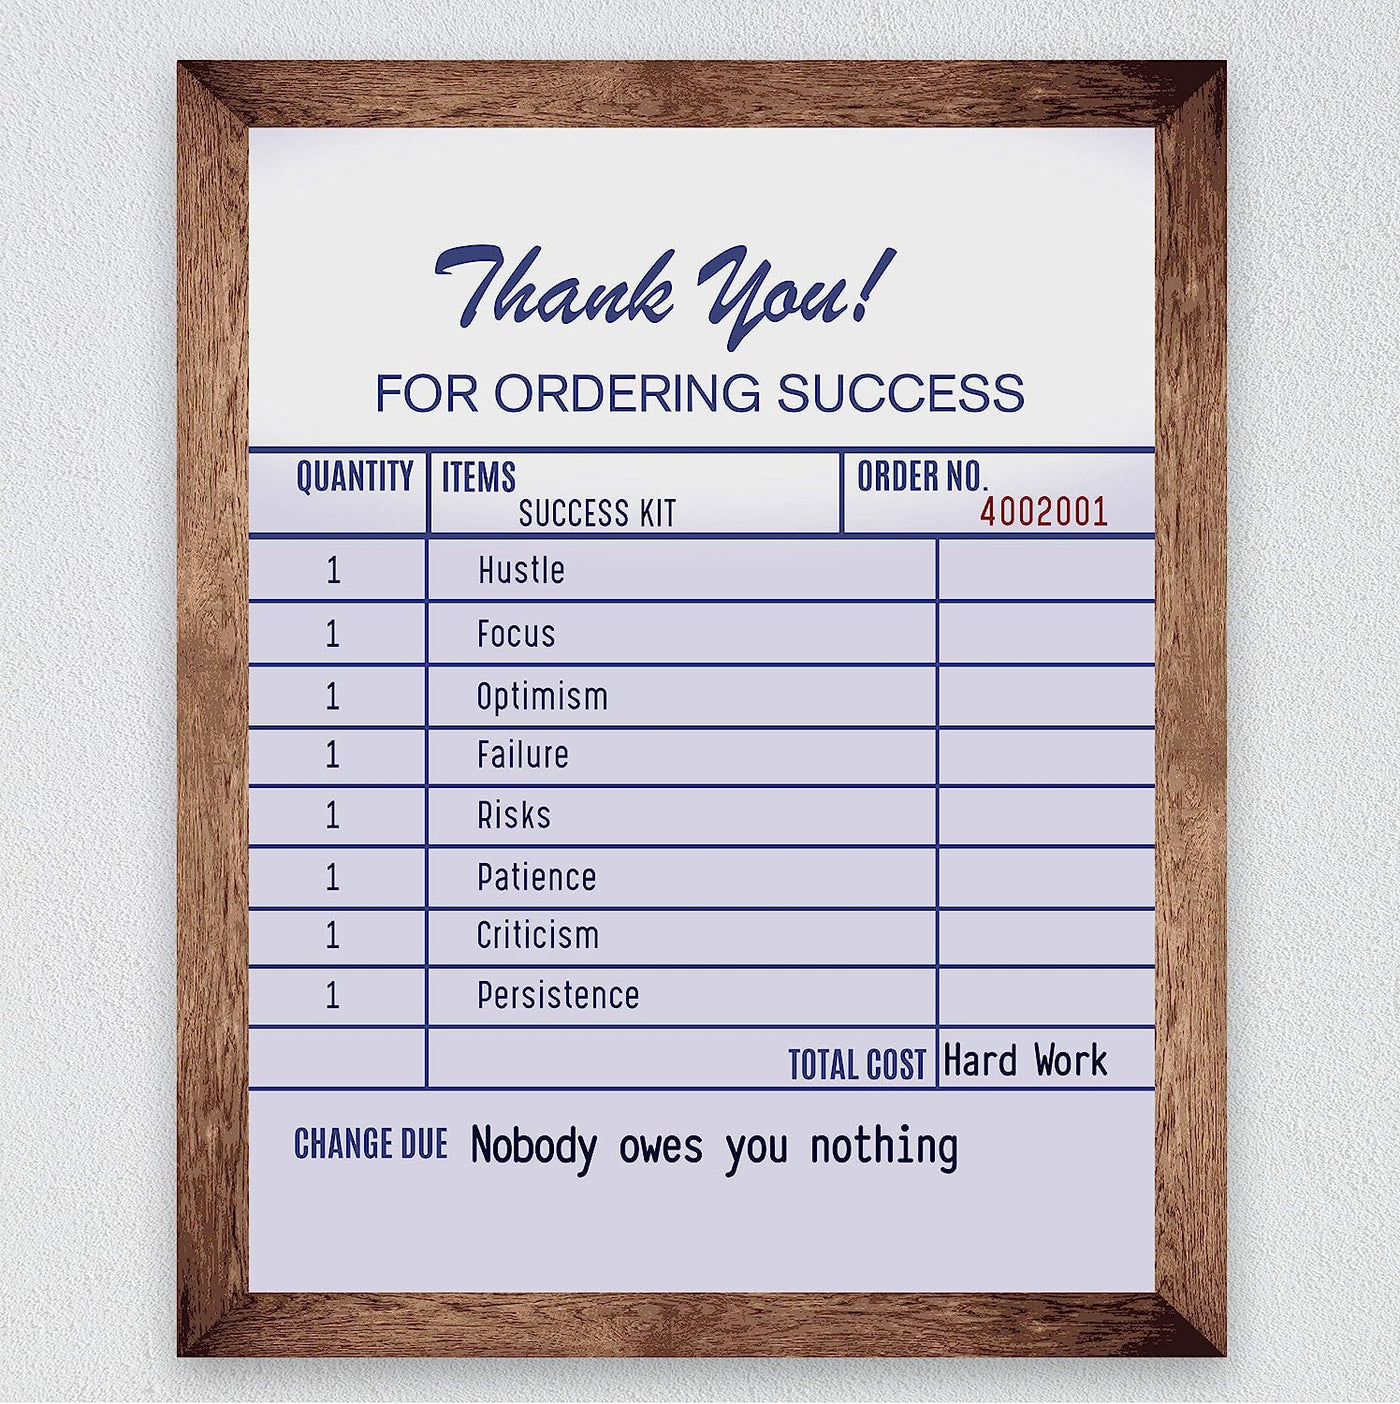 Thank You For Ordering Success Funny Motivational Wall Art Decor -8 x 10" Humorous Receipt Design Print-Ready to Frame. Inspirational Home-Office-School-Dorm Decor. Fun Gift to Encourage Success!